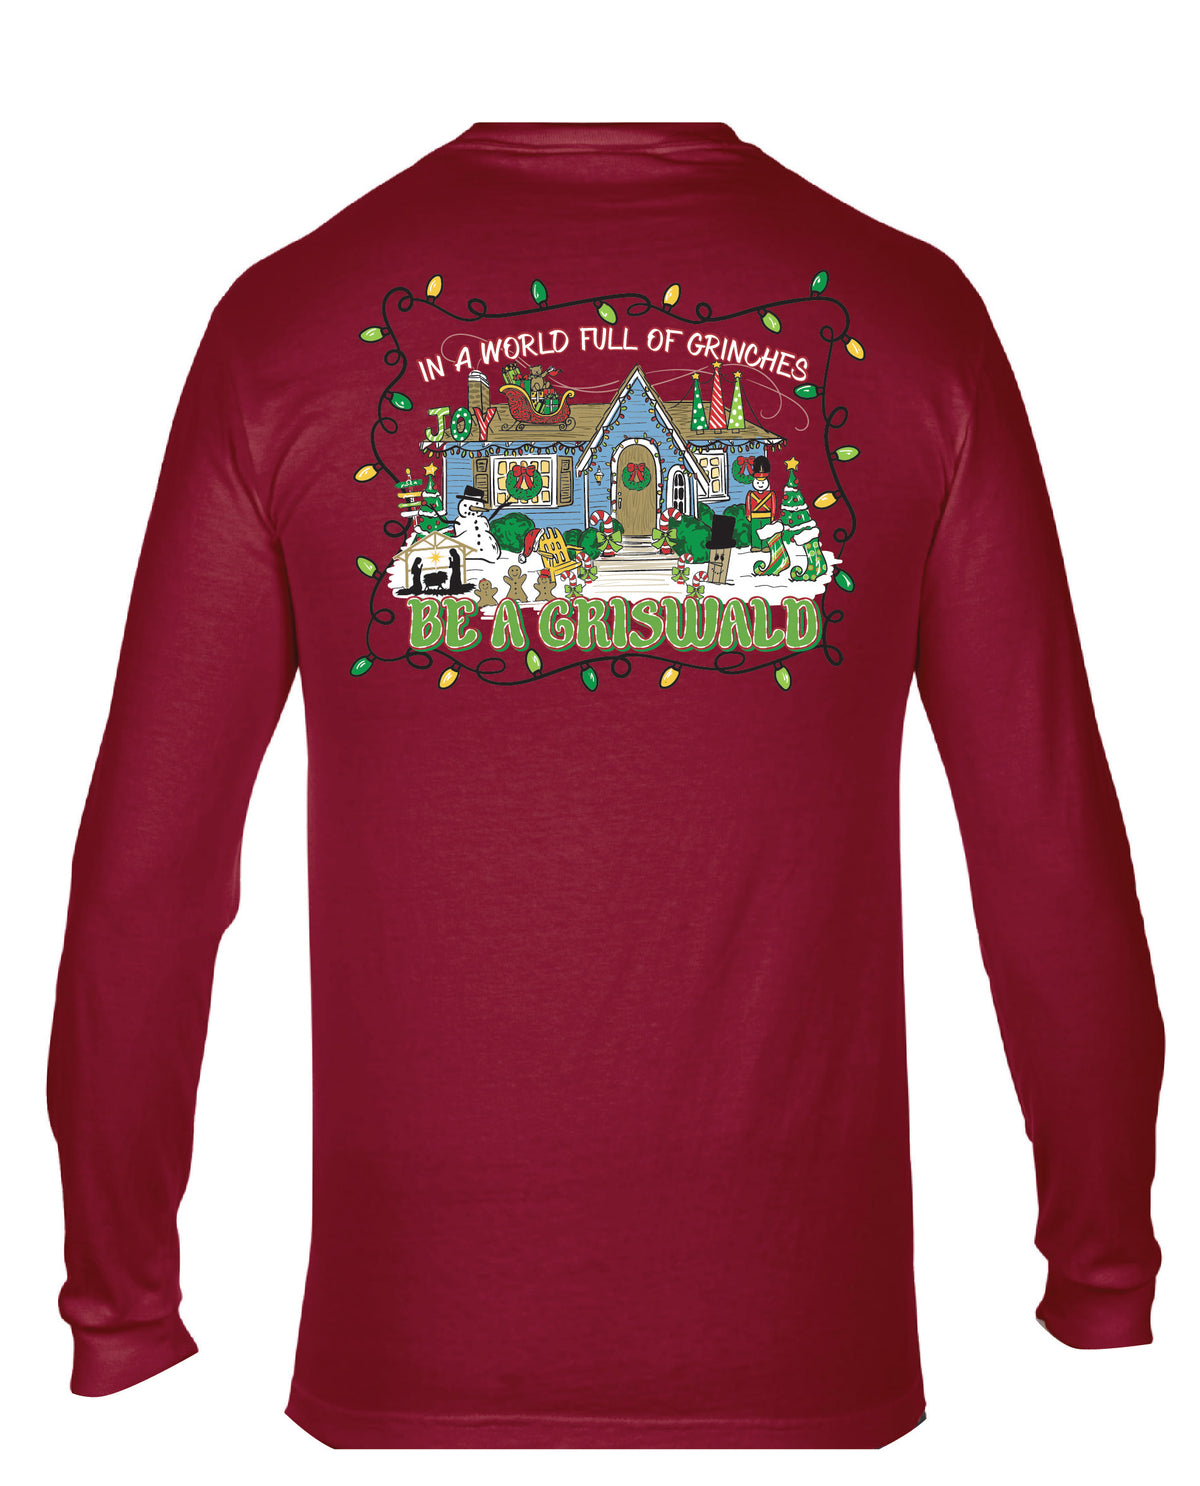 In a World Full of Grinches, Be a Griswald Red Long Sleeve T-Shirt